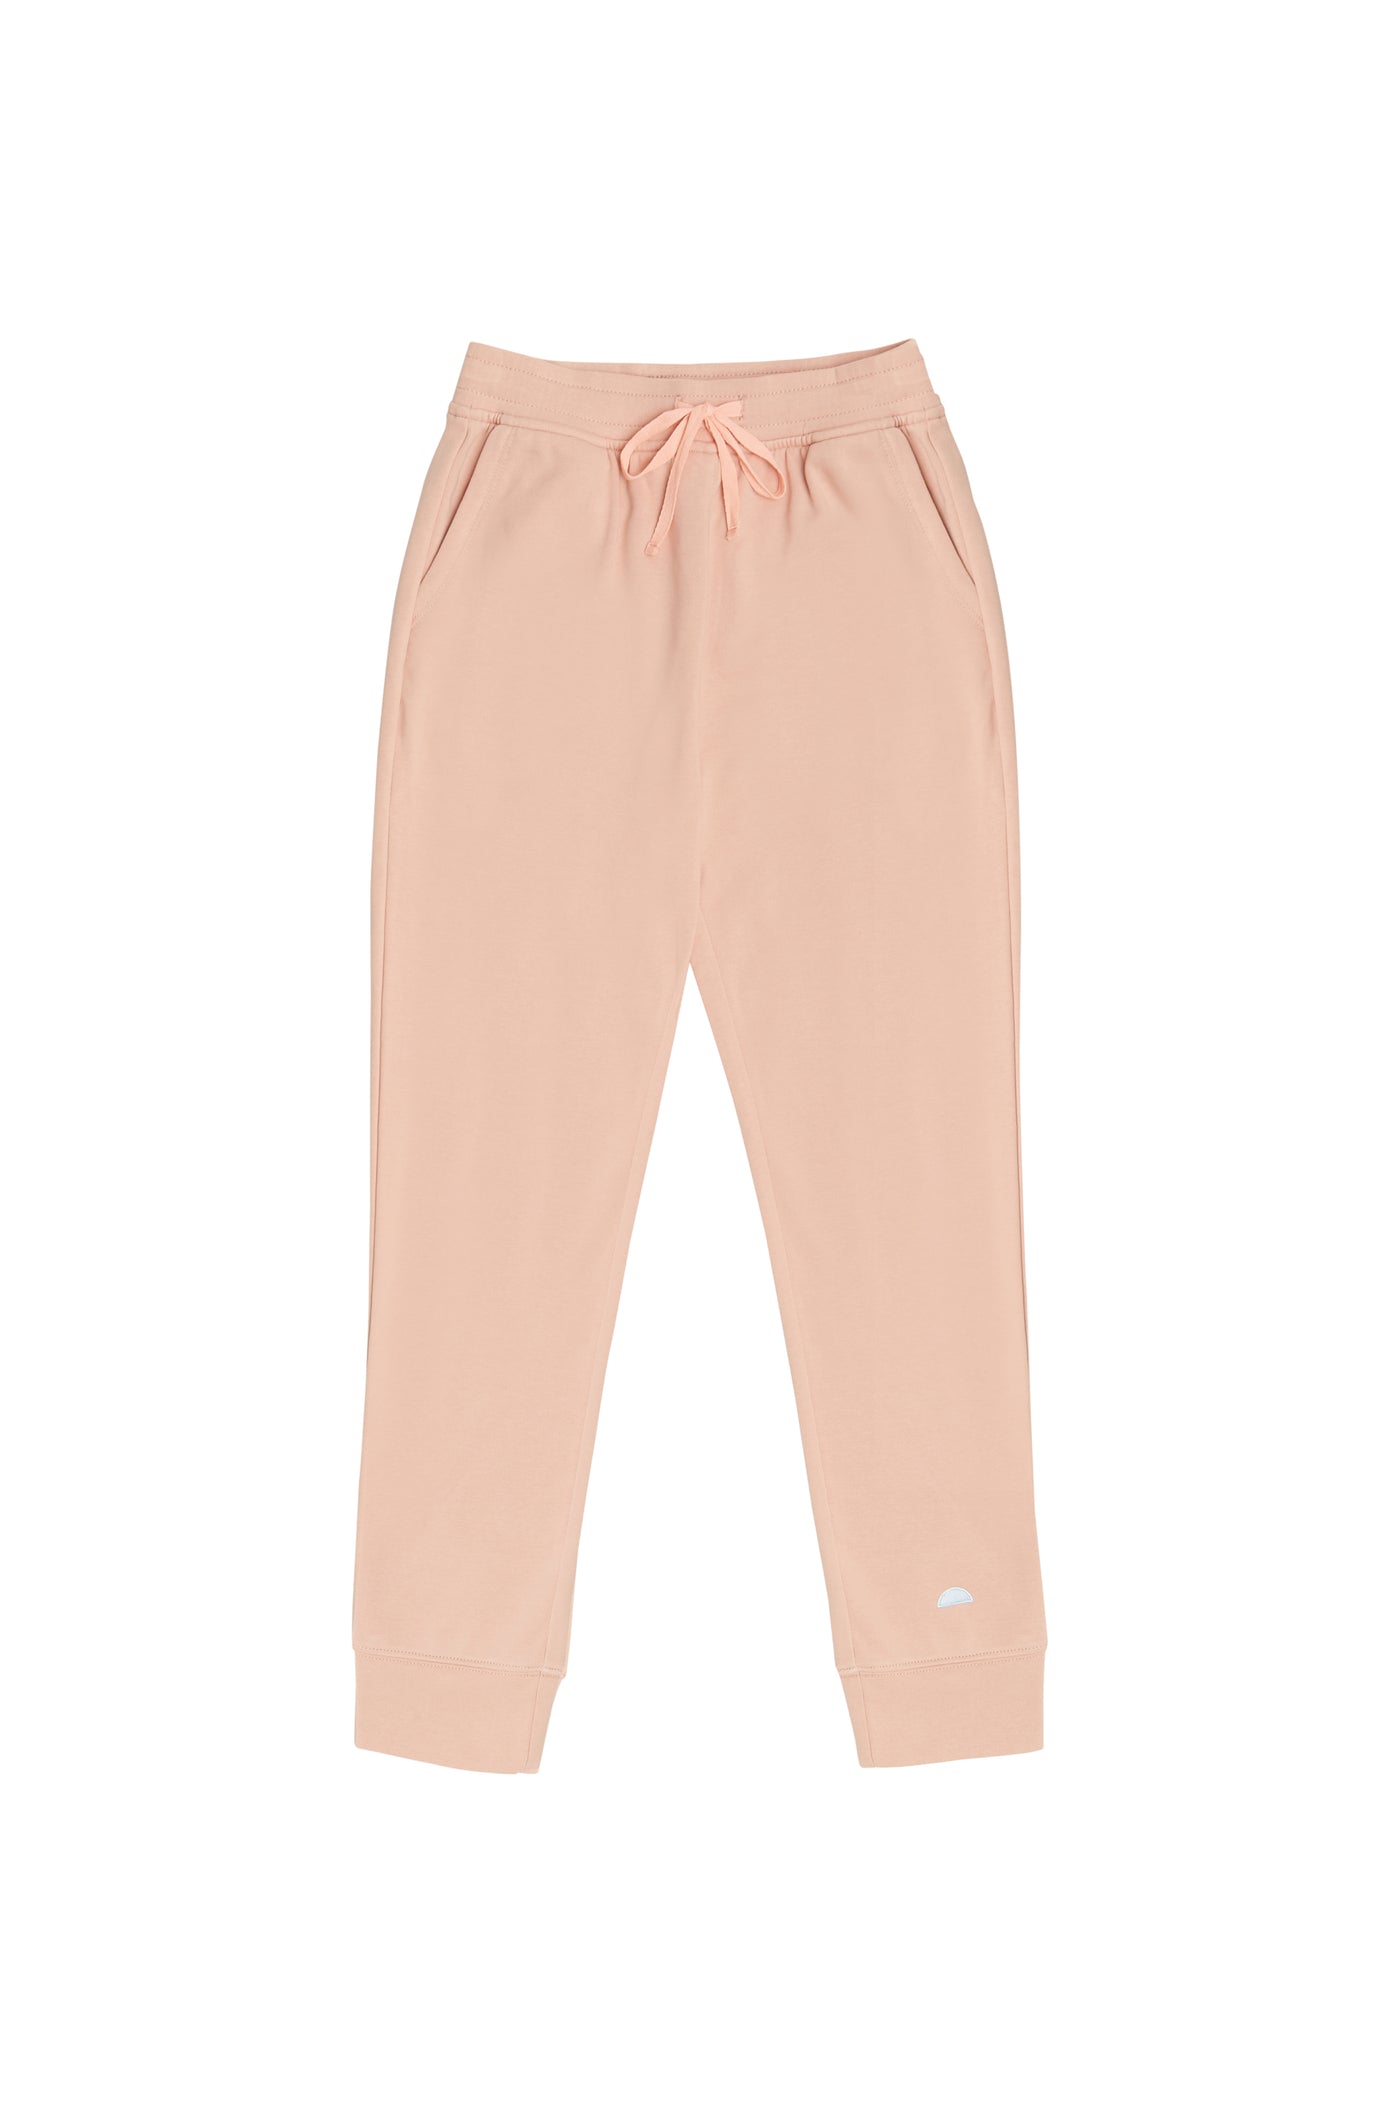 VENICE BEACH HOODIE AND SWEATPANTS IN BLUSH PINK